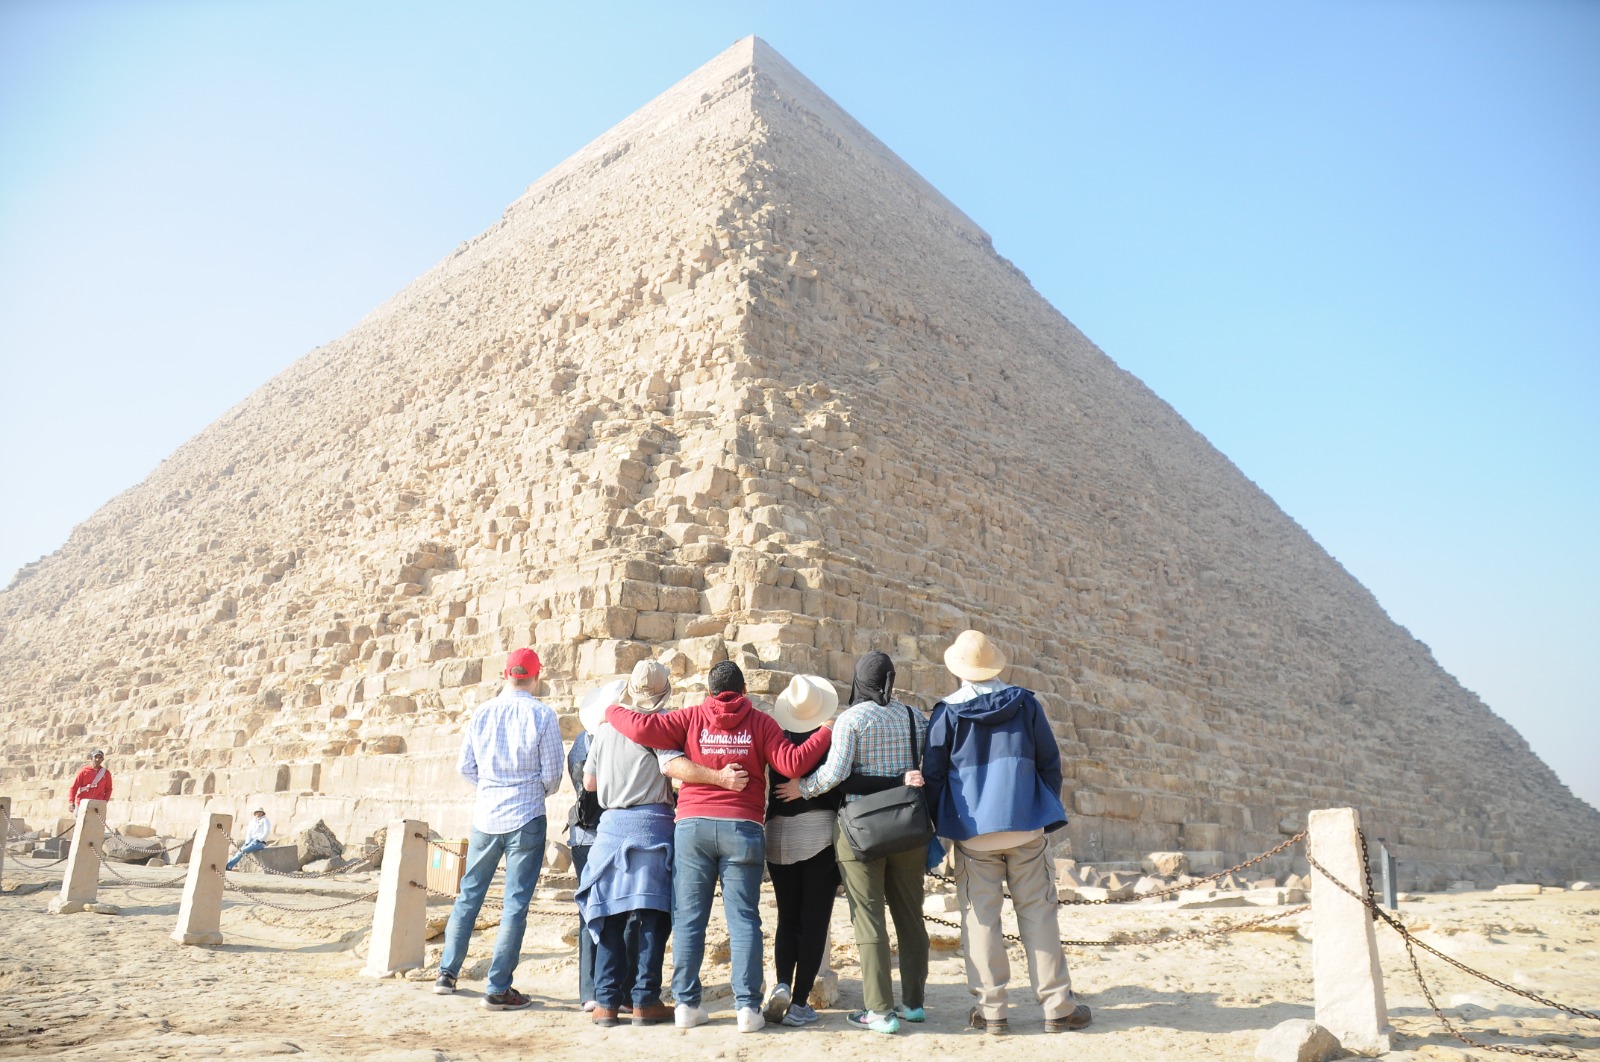 muscat to egypt tour package